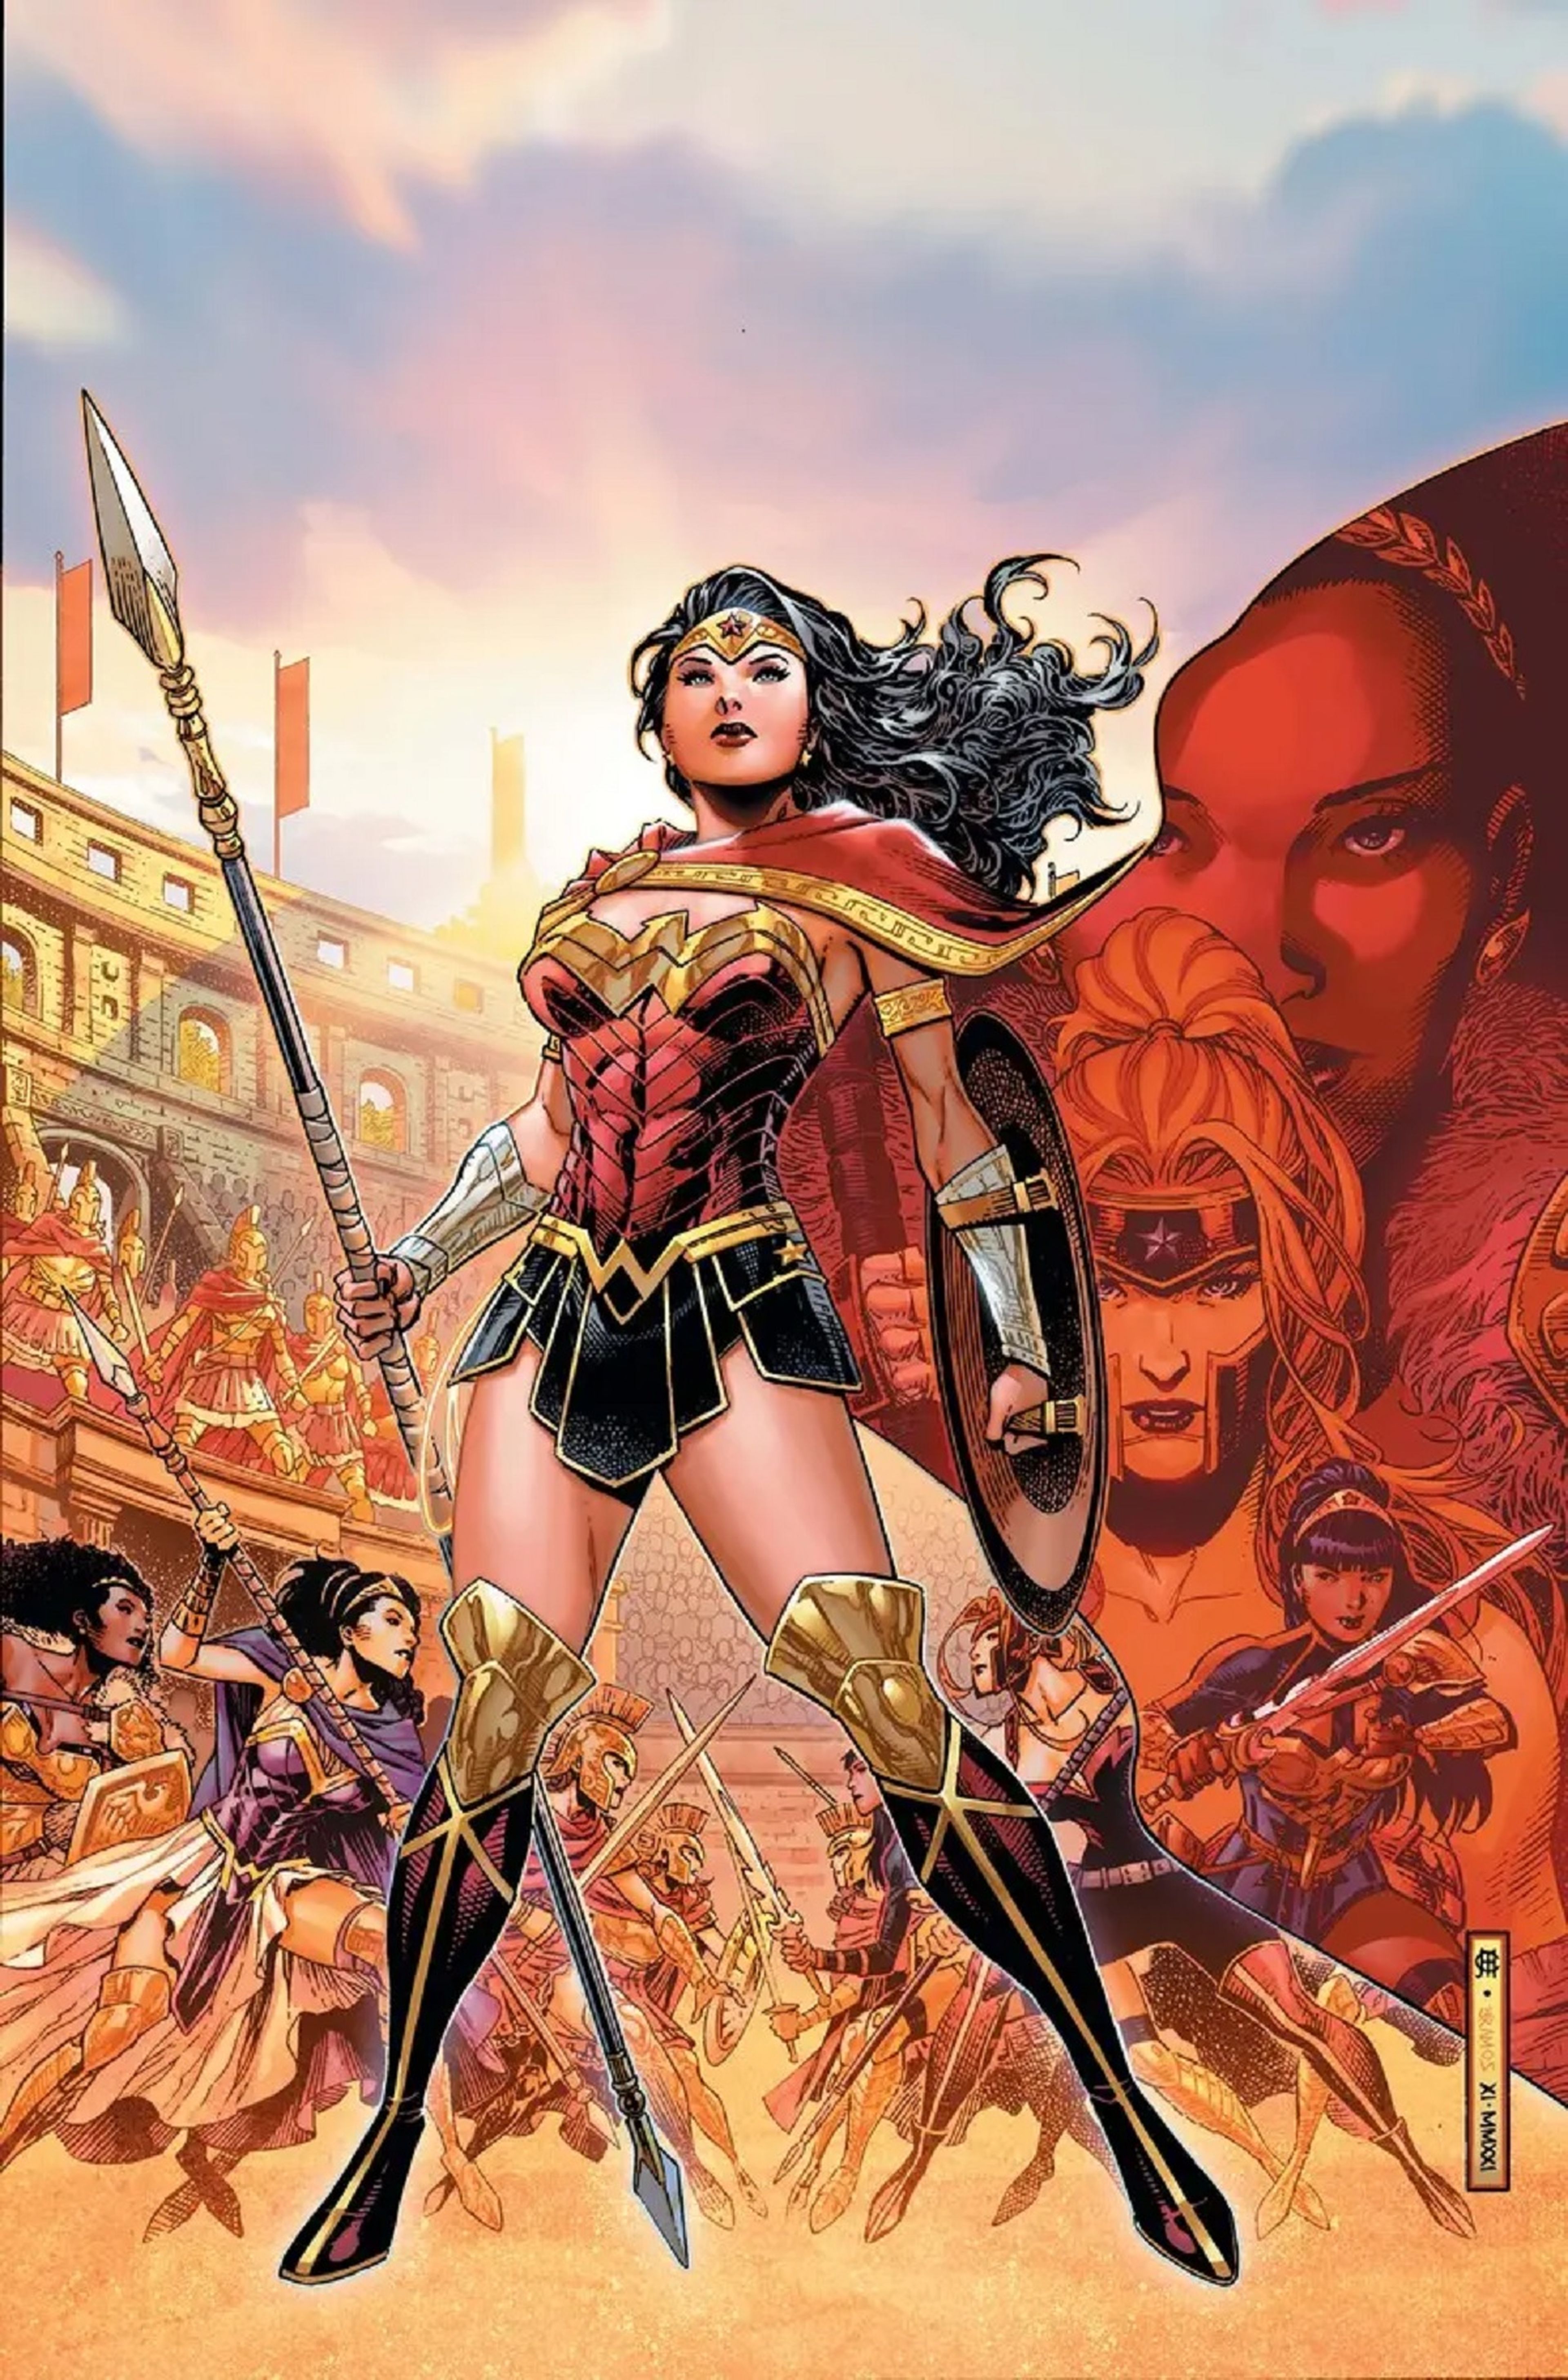 Trial of the Amazons (DC Comics)